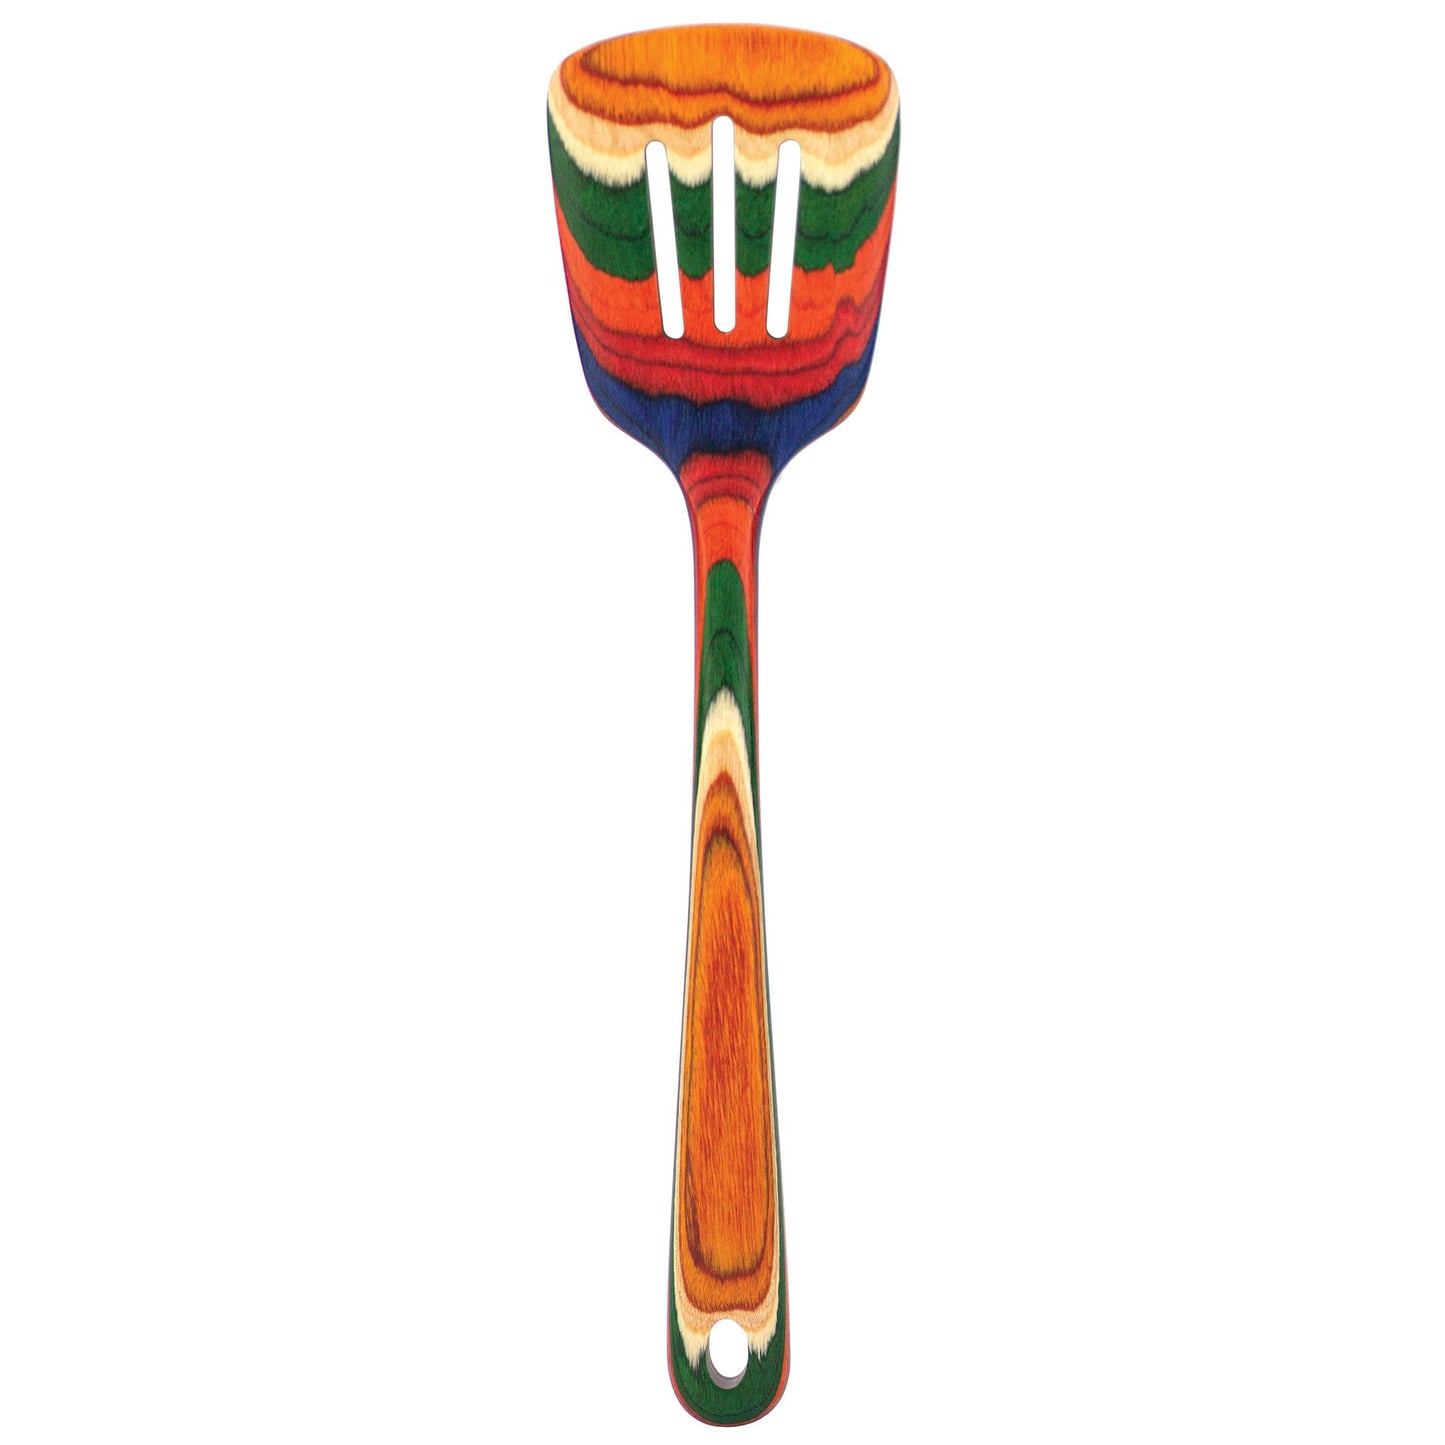 colorful wooden spatula on white background.